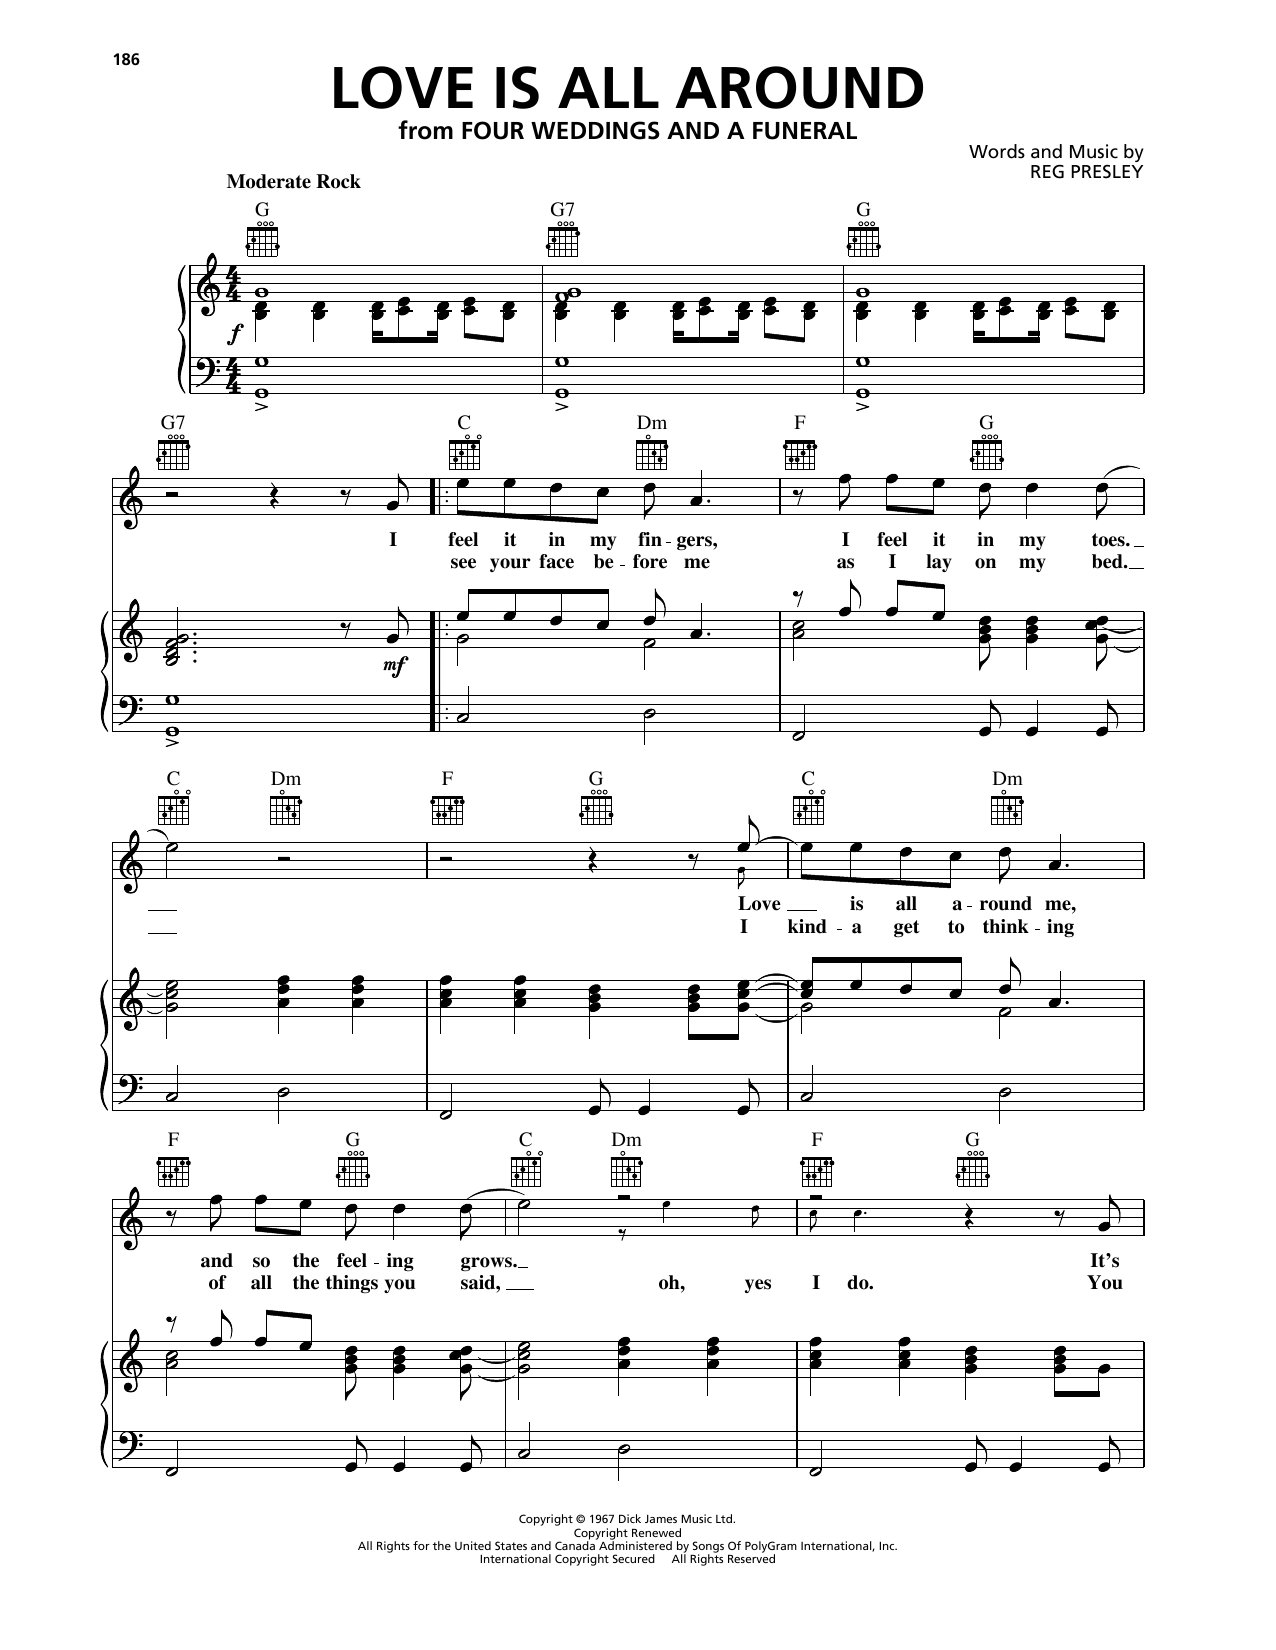 Download The Troggs Love Is All Around Sheet Music